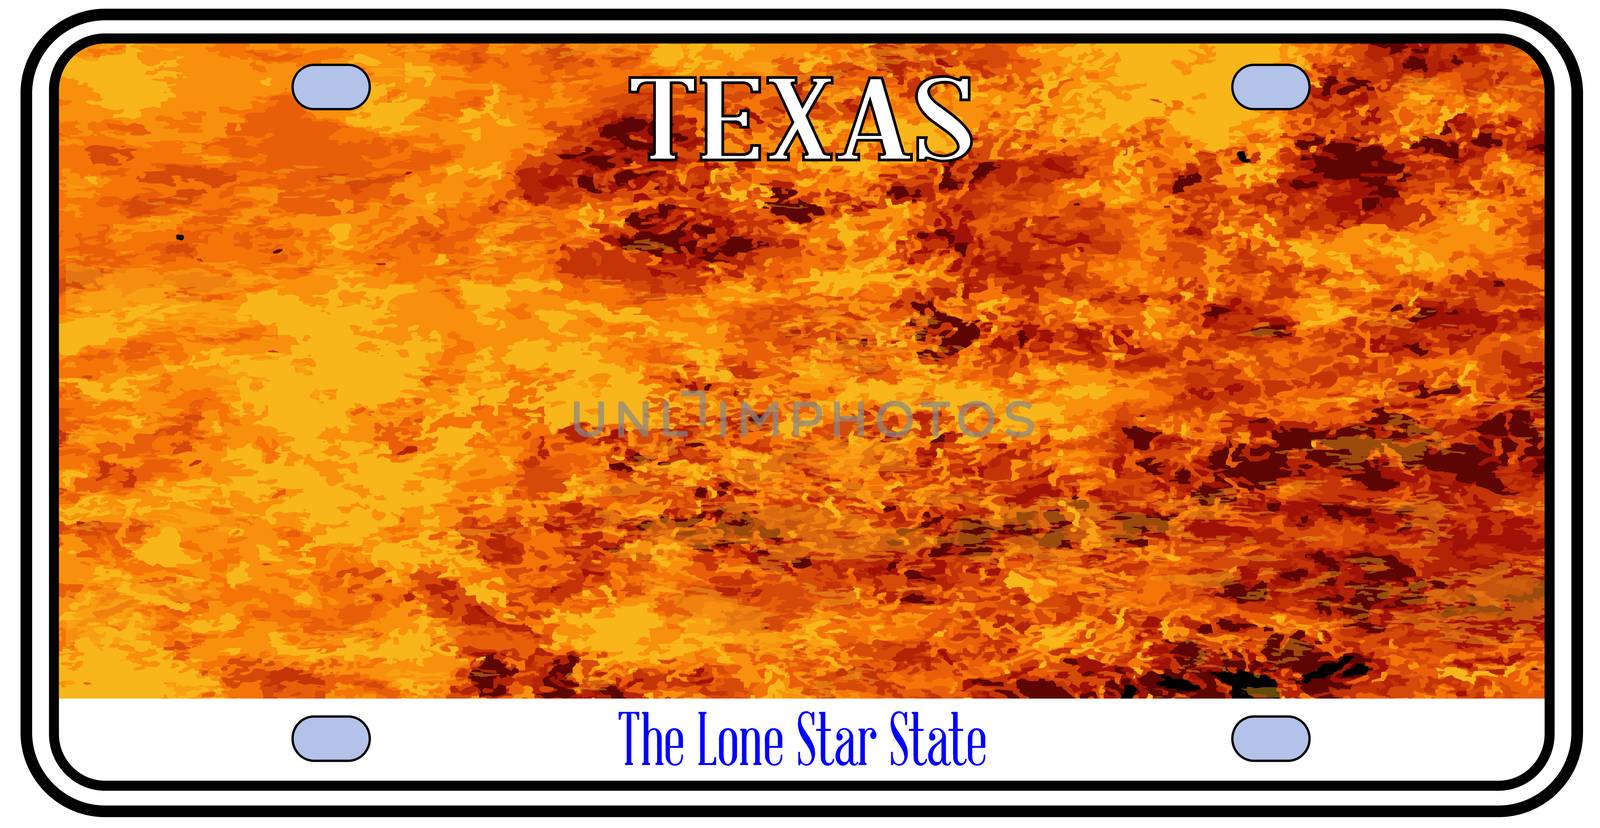 Texas License Plate in flame over a white background